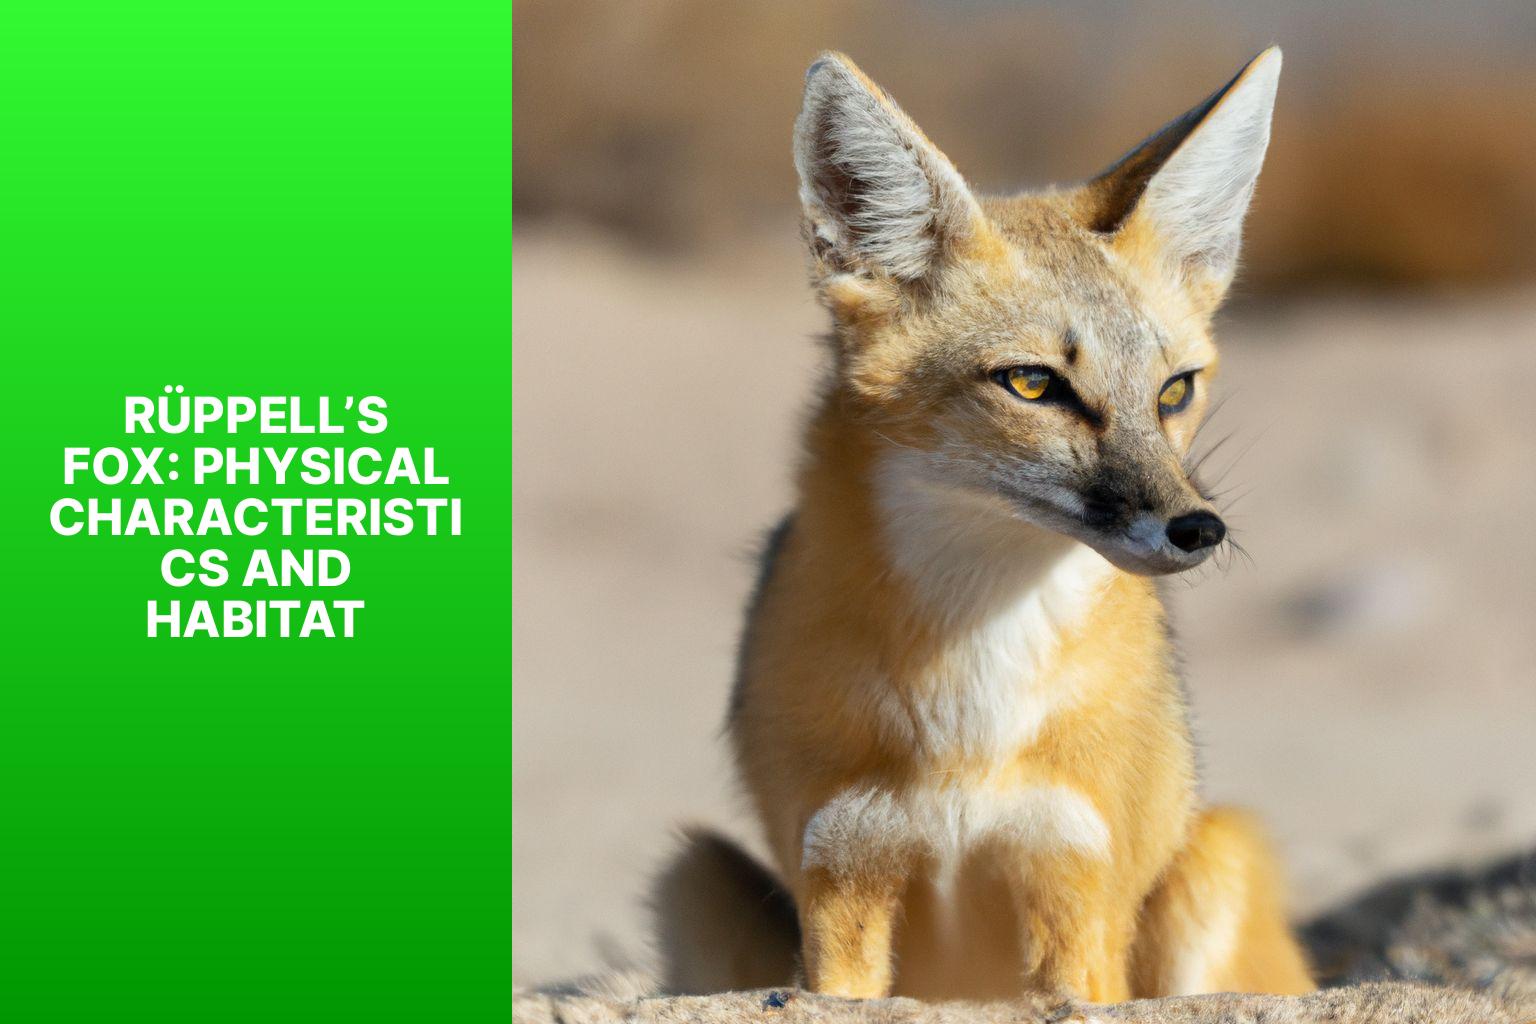 R ppell s Fox: Physical Characteristics and Habitat - R ppell s Fox in Culture 